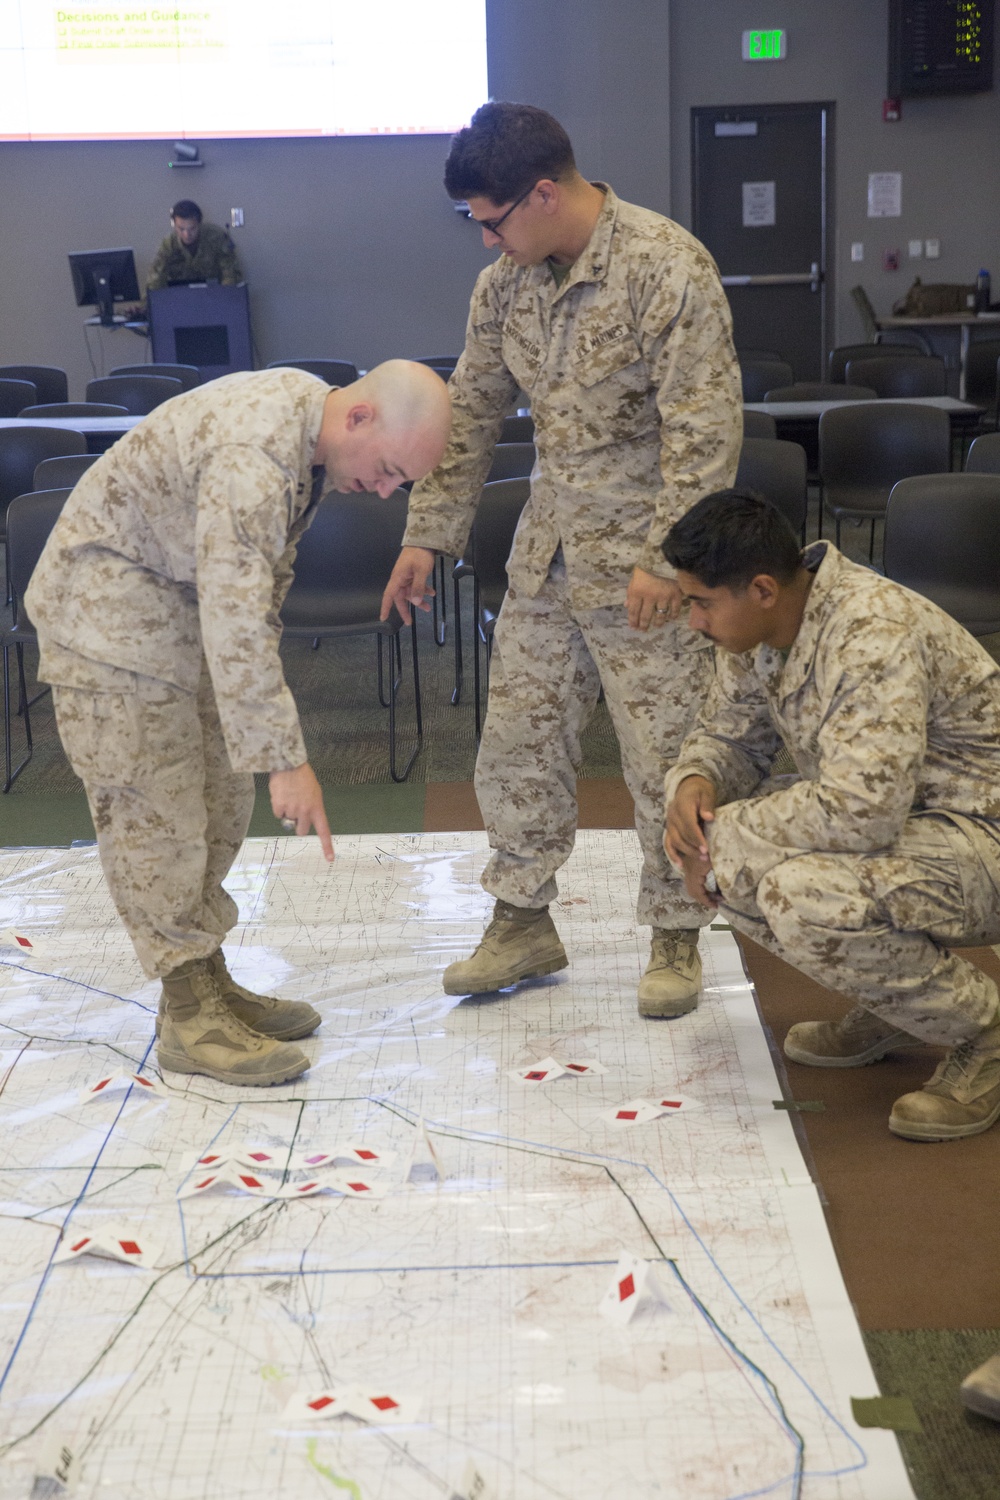 Follow Me: 2nd Marine Division Leads the way at LSE